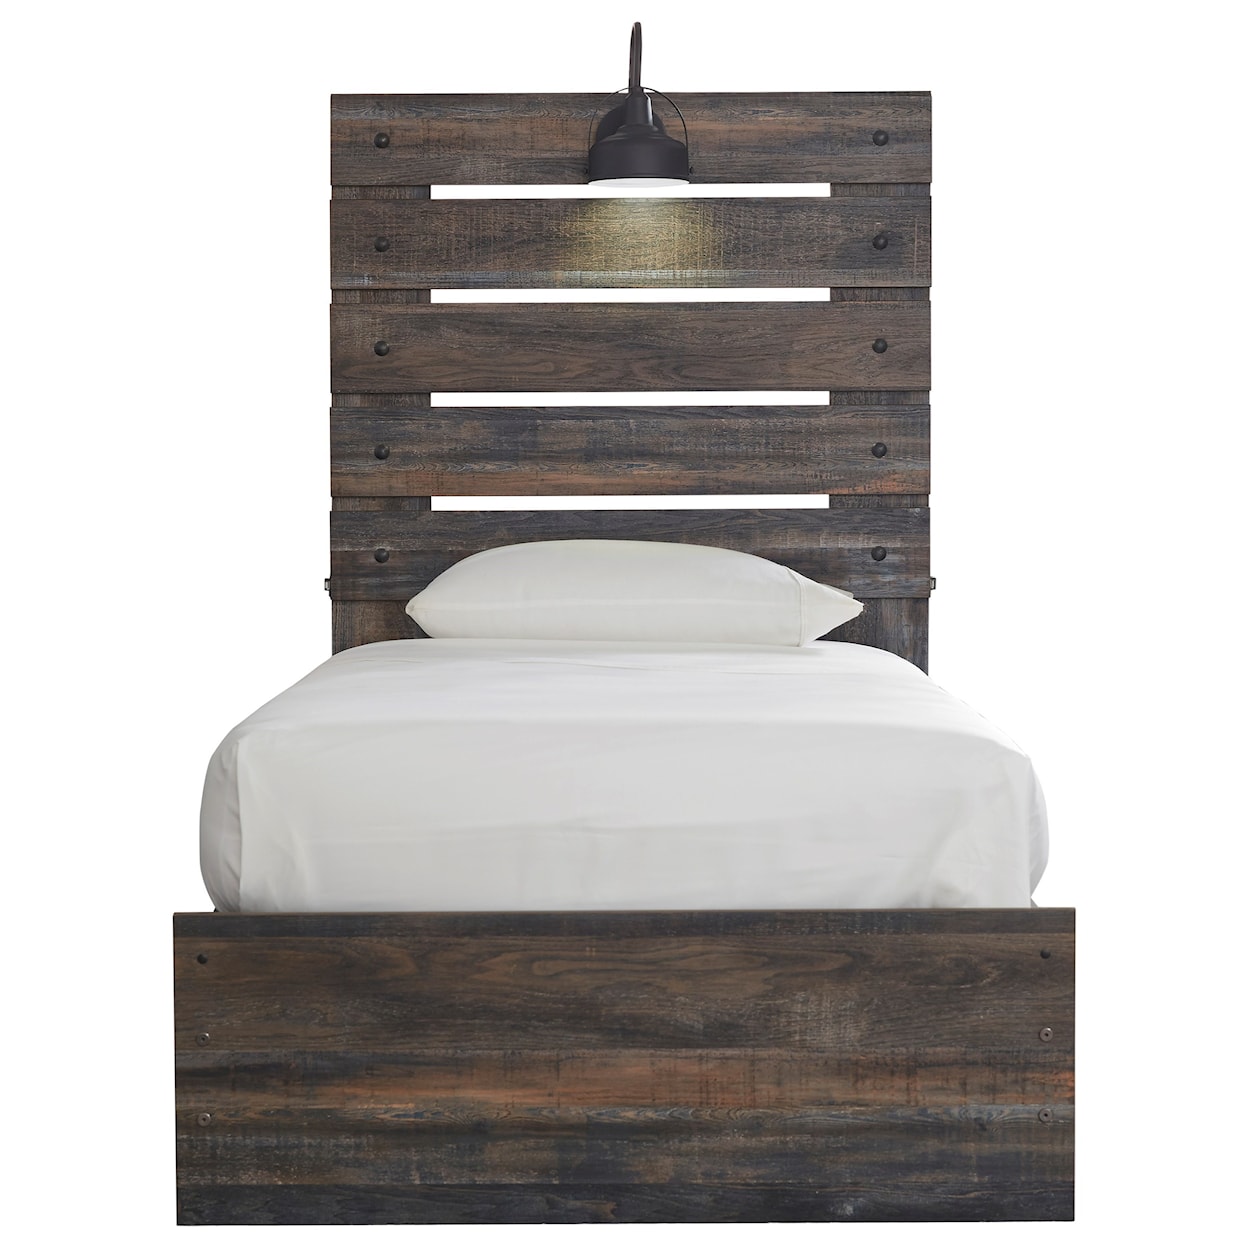 Signature Design Drystan Twin Storage Bed with 4 Drawers